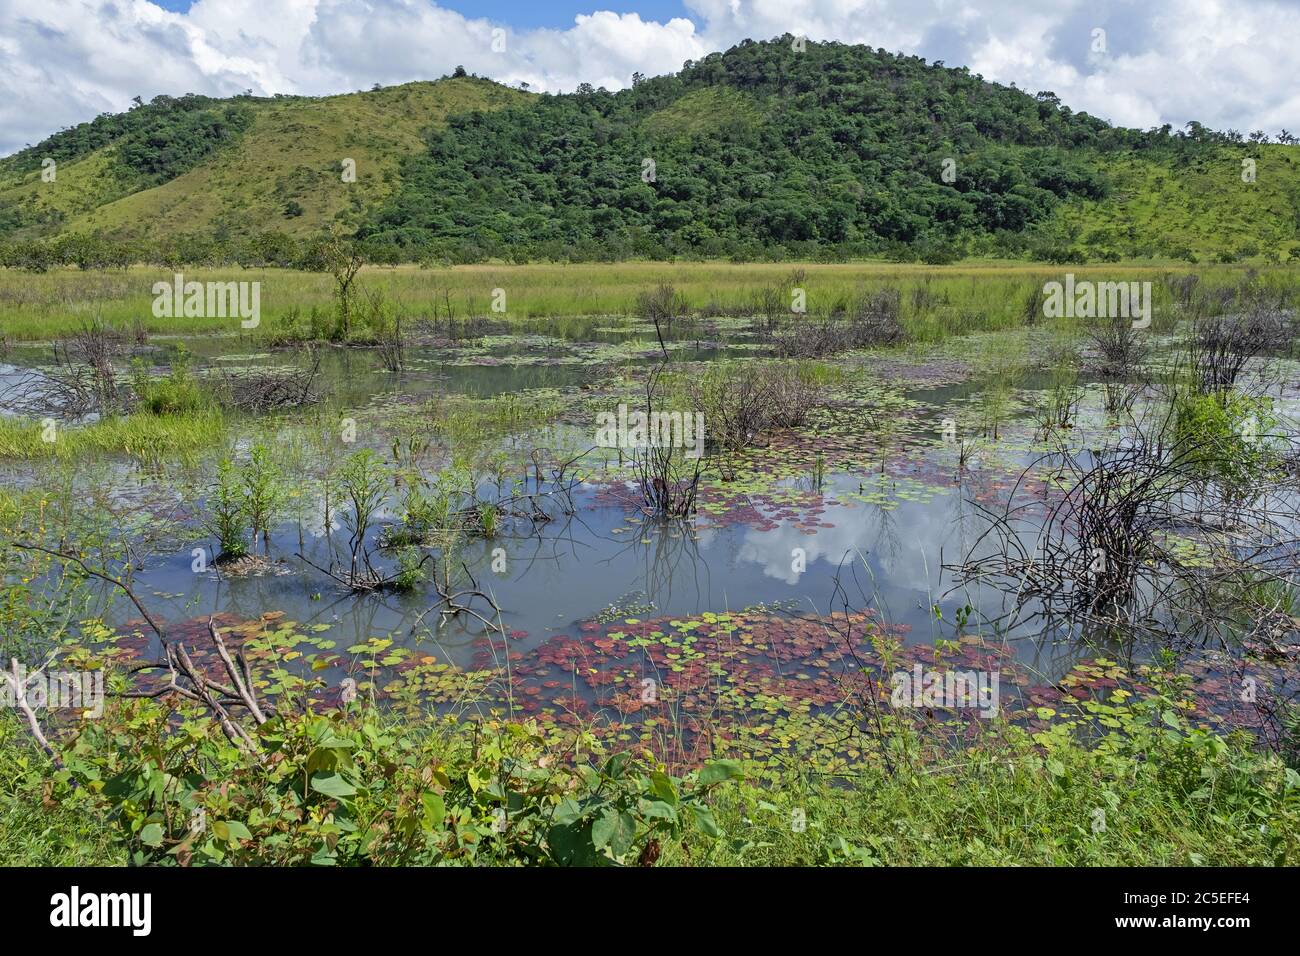 Marshland / swamp along the Linden-Lethem dirt road linking Lethem and Georgetown through the savanna, Guyana, South America Stock Photo